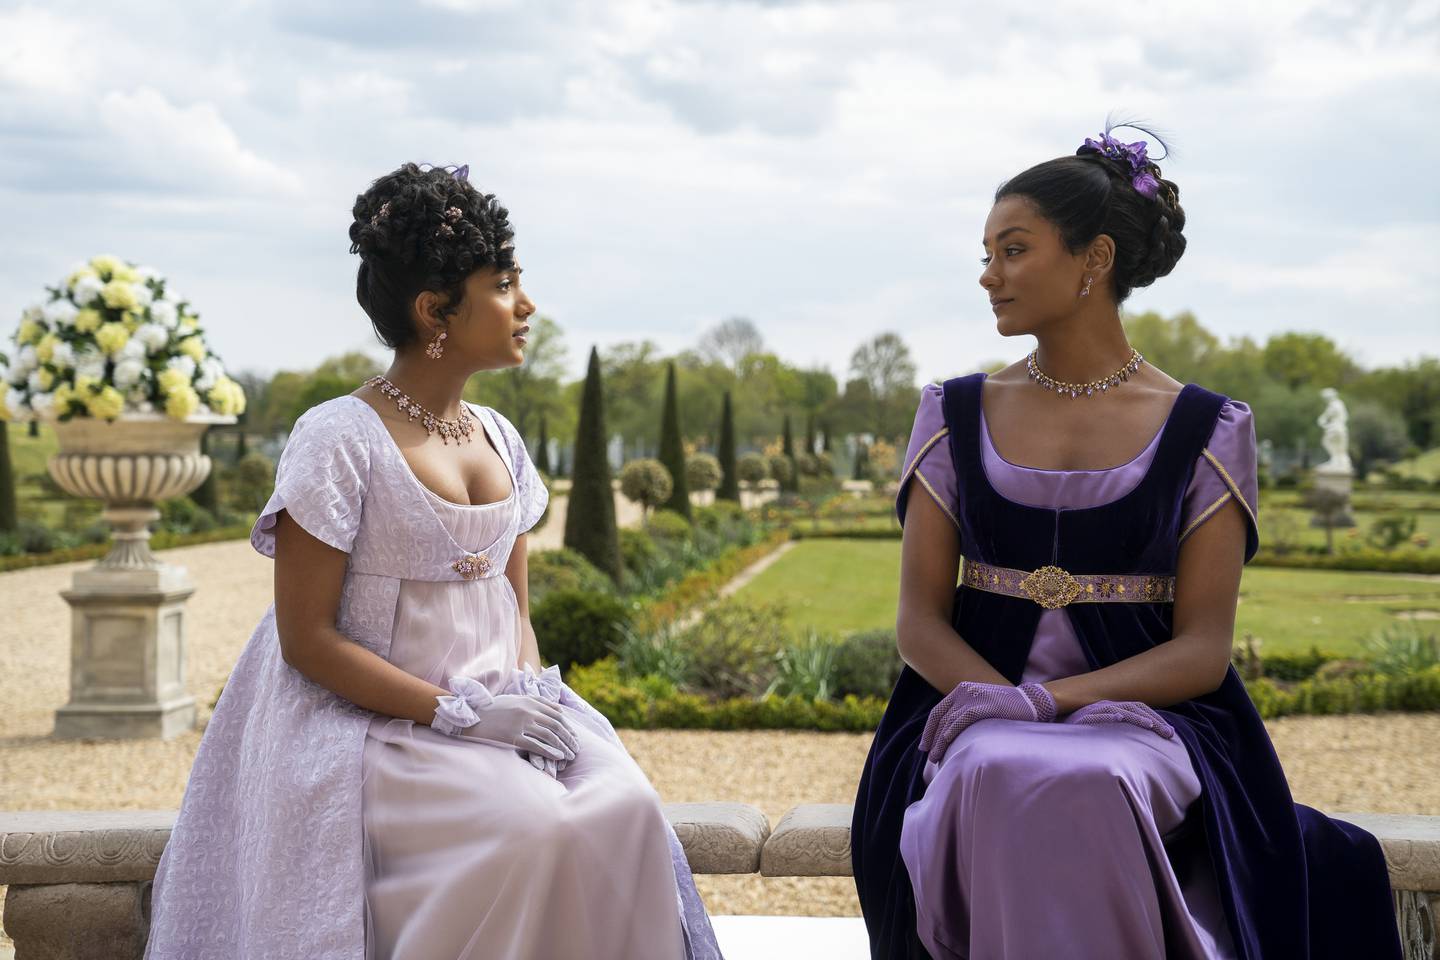 Hill House Home has collaborated with 'Bridgerton' to create a capsule collection of nap dresses inspired by the Regency-era styles on the show. Photo: Netflix